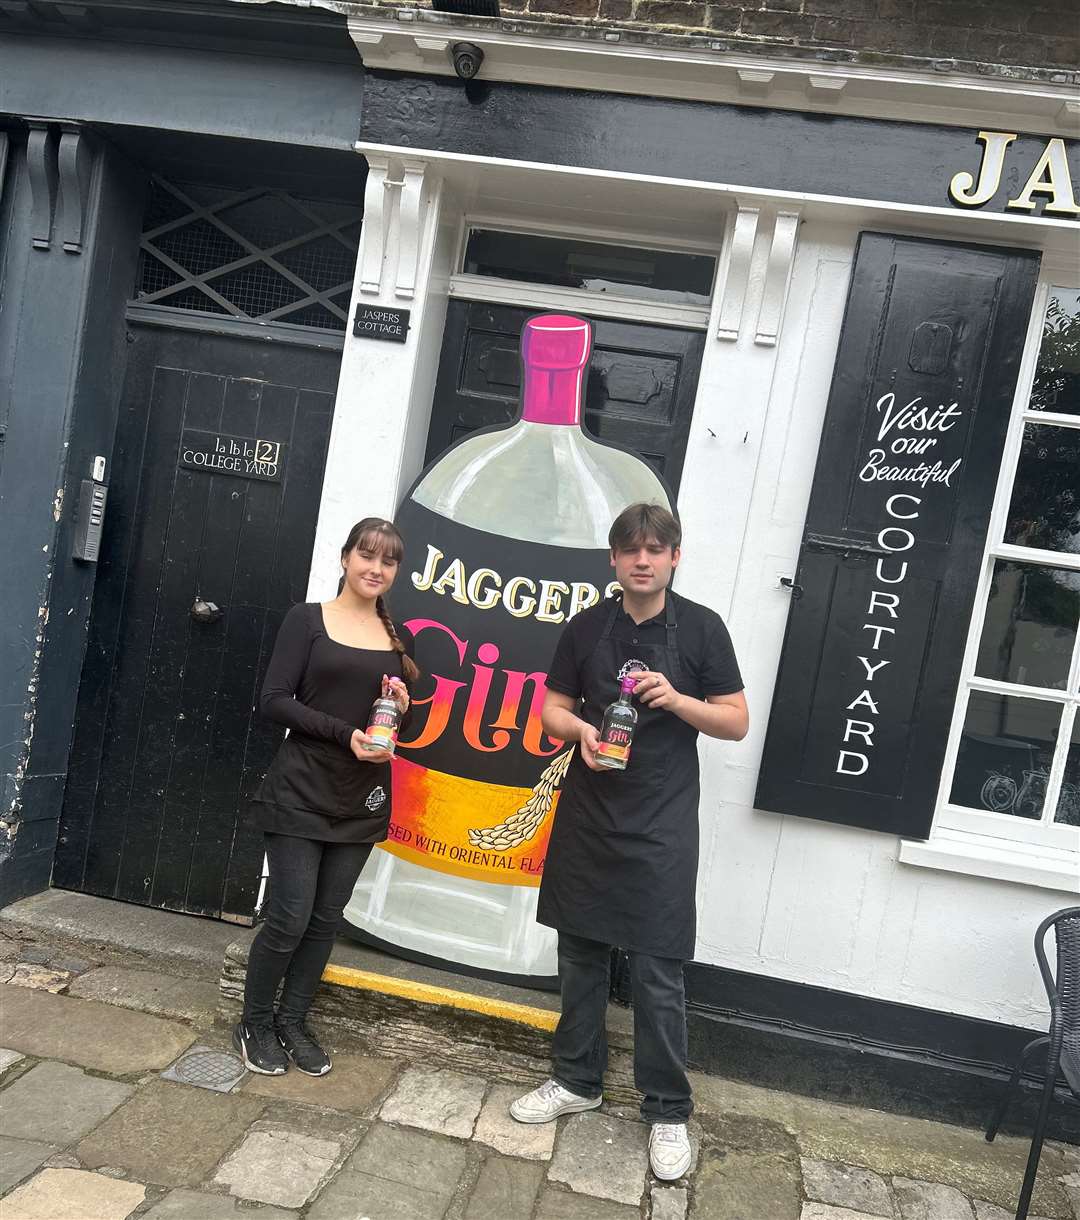 Sophie Piasecki and Jorens Hearn present Jaggers Gin - the latest addition to the cocktail bar in Rochester high street